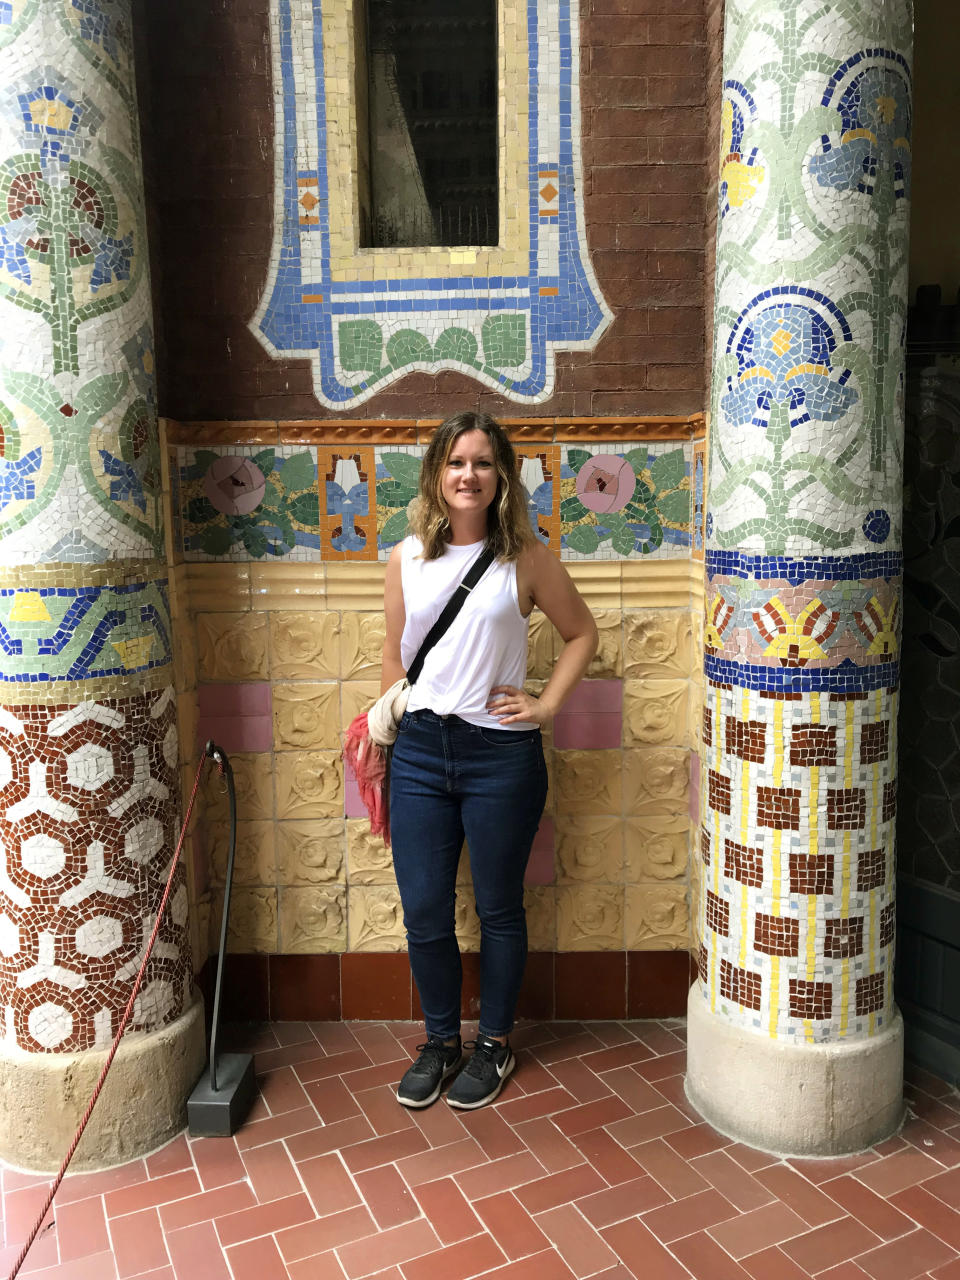 This Oct. 14, 2019 photo shows Associated Press writer Courtney Bonnell posing in front of the mosaic-encrusted terrace of architect Lluís Domènech I Montaner’s Palau de la Música Catalana in Barcelona, Spain. f you’re taking a solo trip for the first time, a European city like Barcelona is a good place to start. The city is dynamic, the streets and cafes are always packed, it’s safe to walk around at night and people mostly speak English. (Courtney Bonnell via AP)